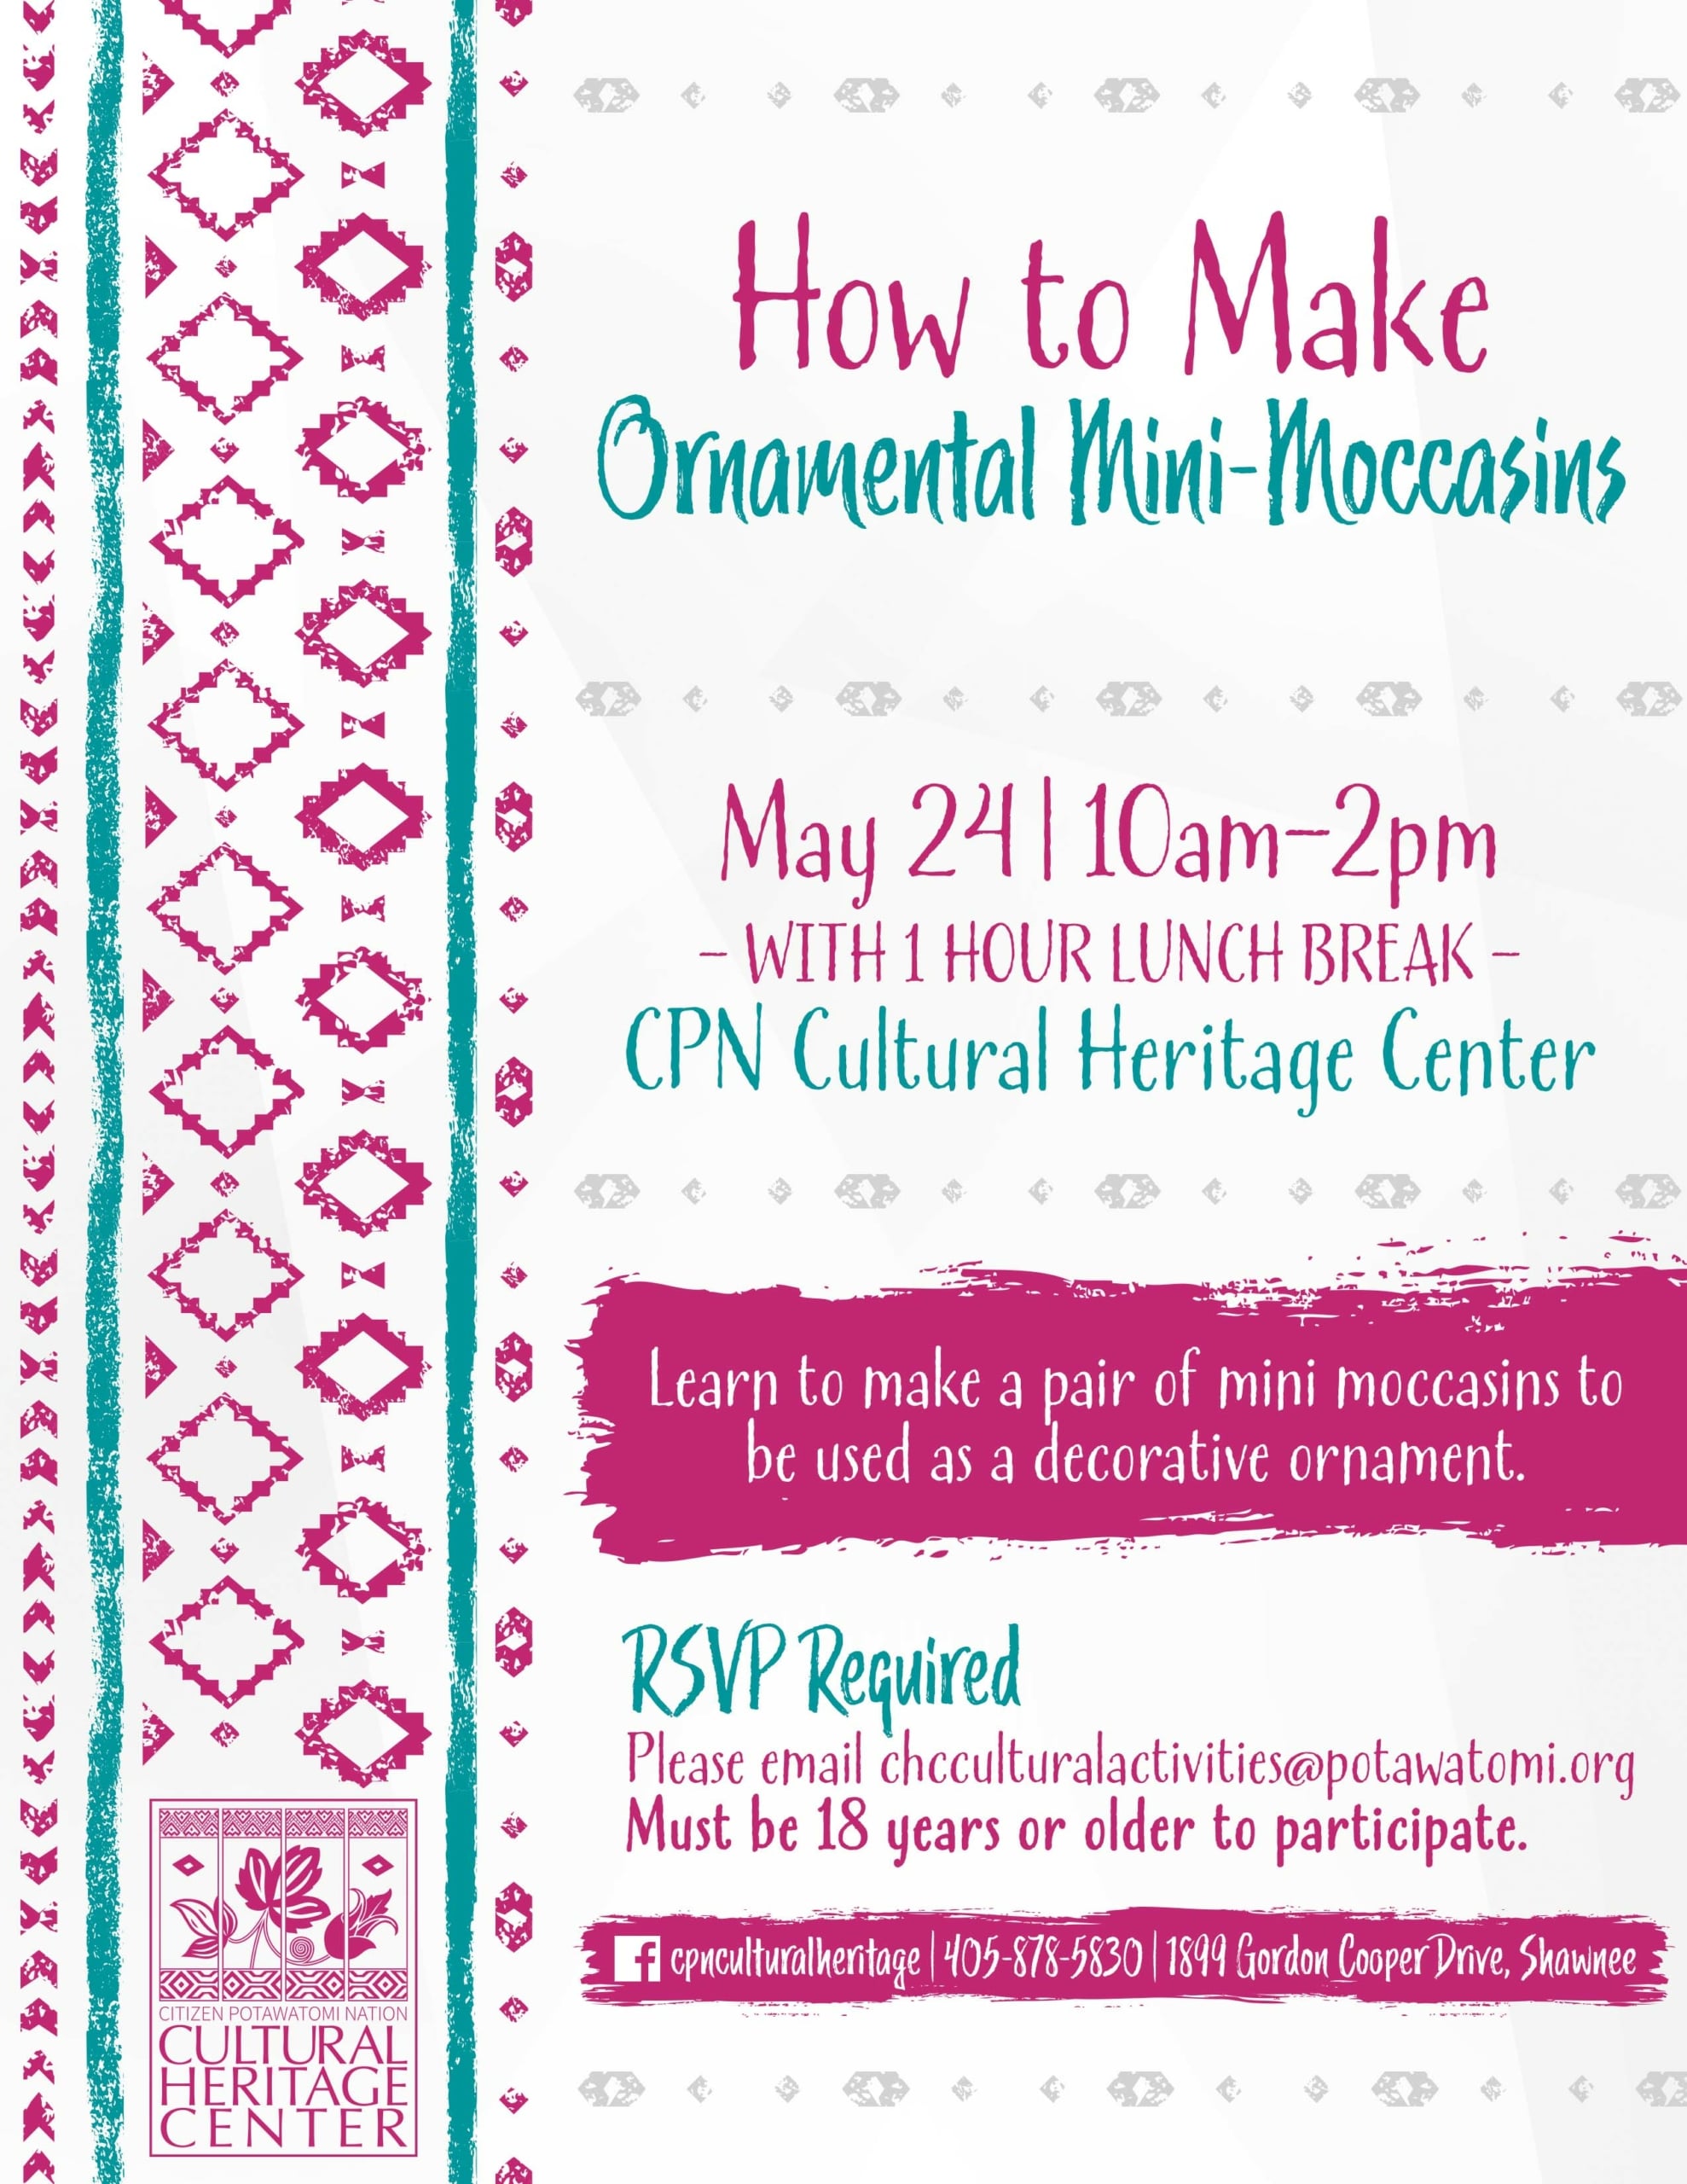 Teal and magenta geometric patterning frames text inviting participants to the "how to make ornamental mini-moccasins" class on Tuesday, May 24, 2022.